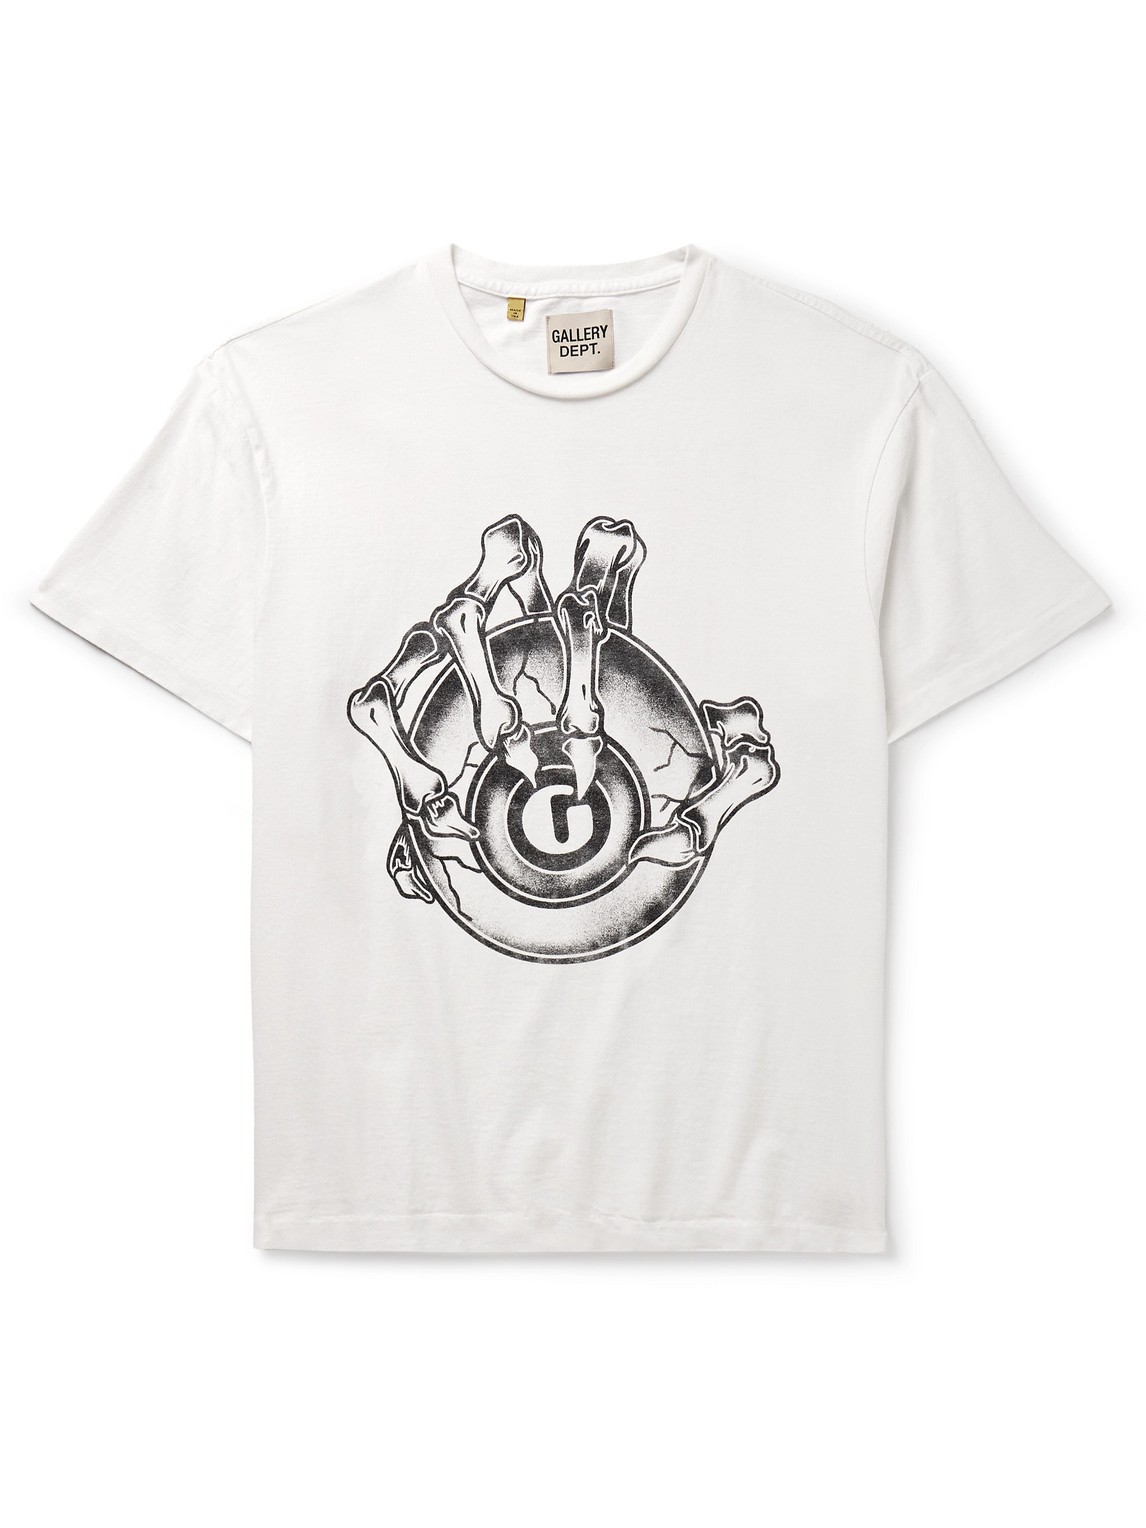 Gallery Dept. Big G Ball Printed Cotton-jersey T-shirt In White